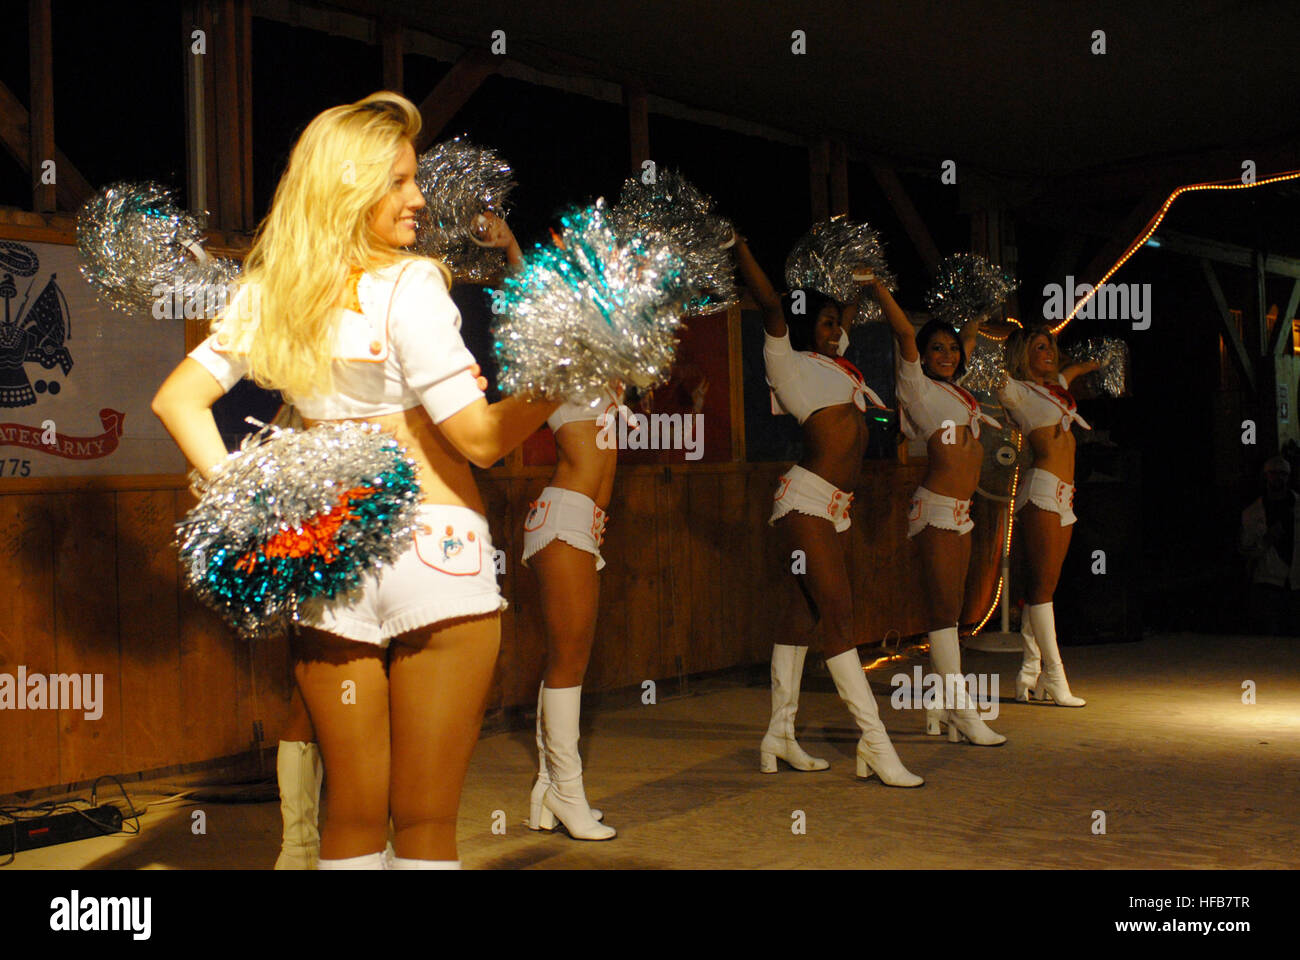 Miami Dolphins' cheerleaders entertained Soldiers, Sailors, Marines and Airmen on a tour of the area. They performed a few dance routines and signed autographs for the troops. Dolphins cheerleaders Djibouti 7 Stock Photo